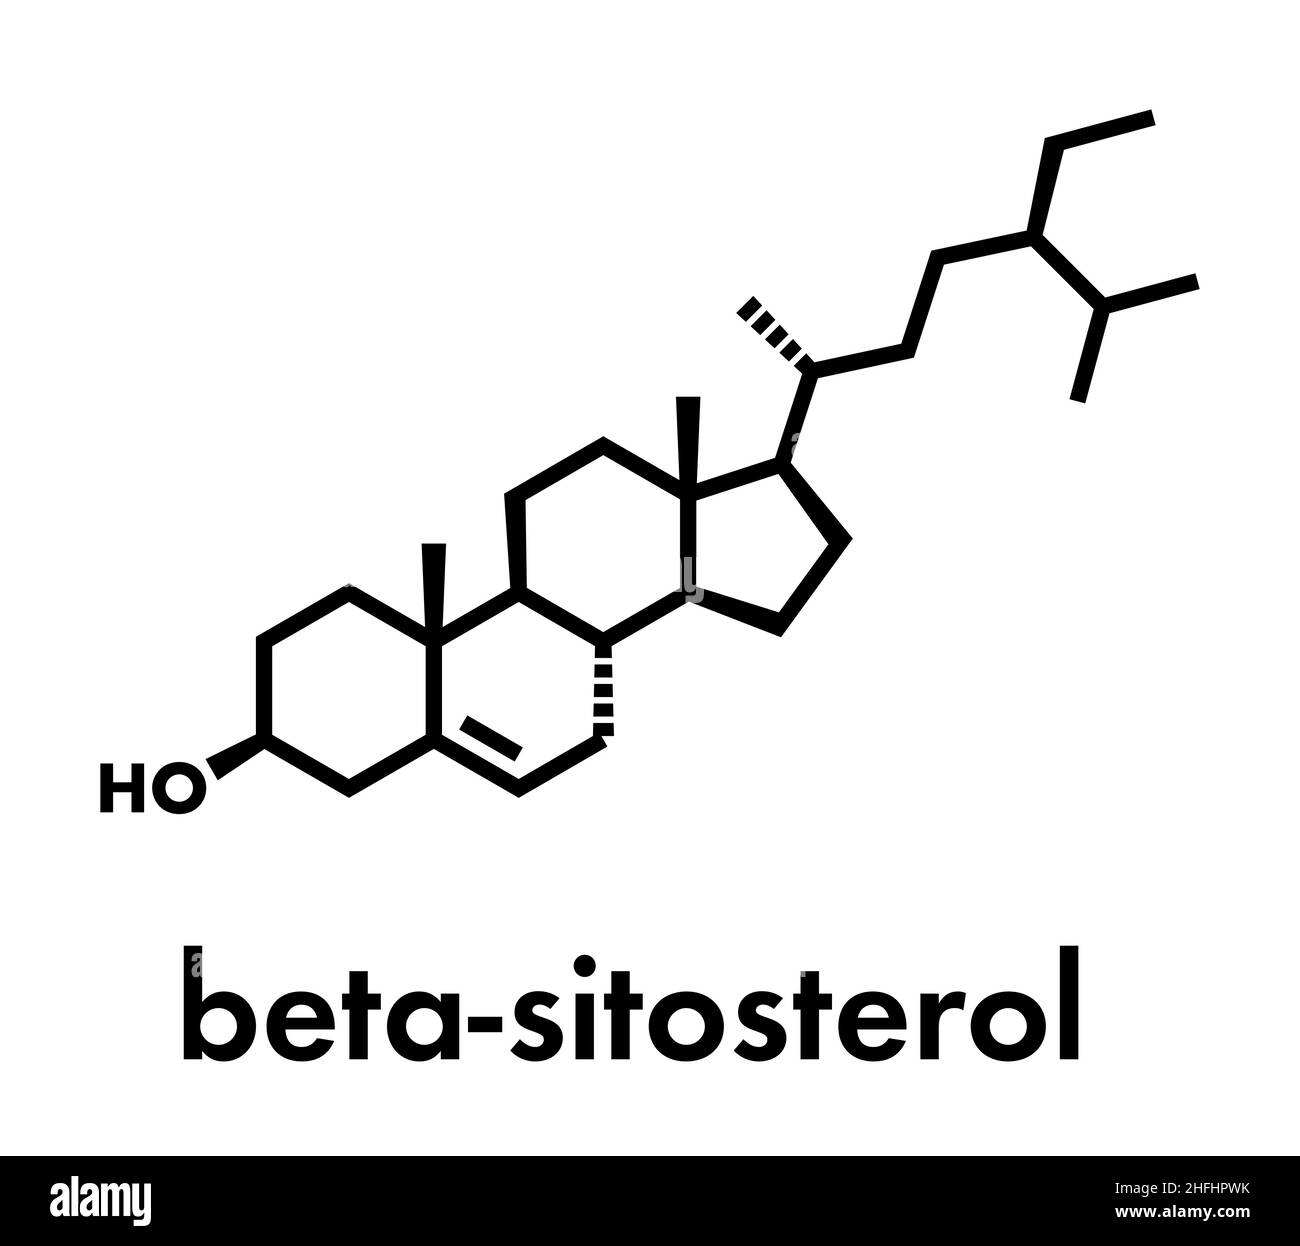 Beta-sitosterol phytosterol molecule. Investigated in treatment of benign prostate hyperplasia (BPH) and high cholesterol levels. Skeletal formula. Stock Vector